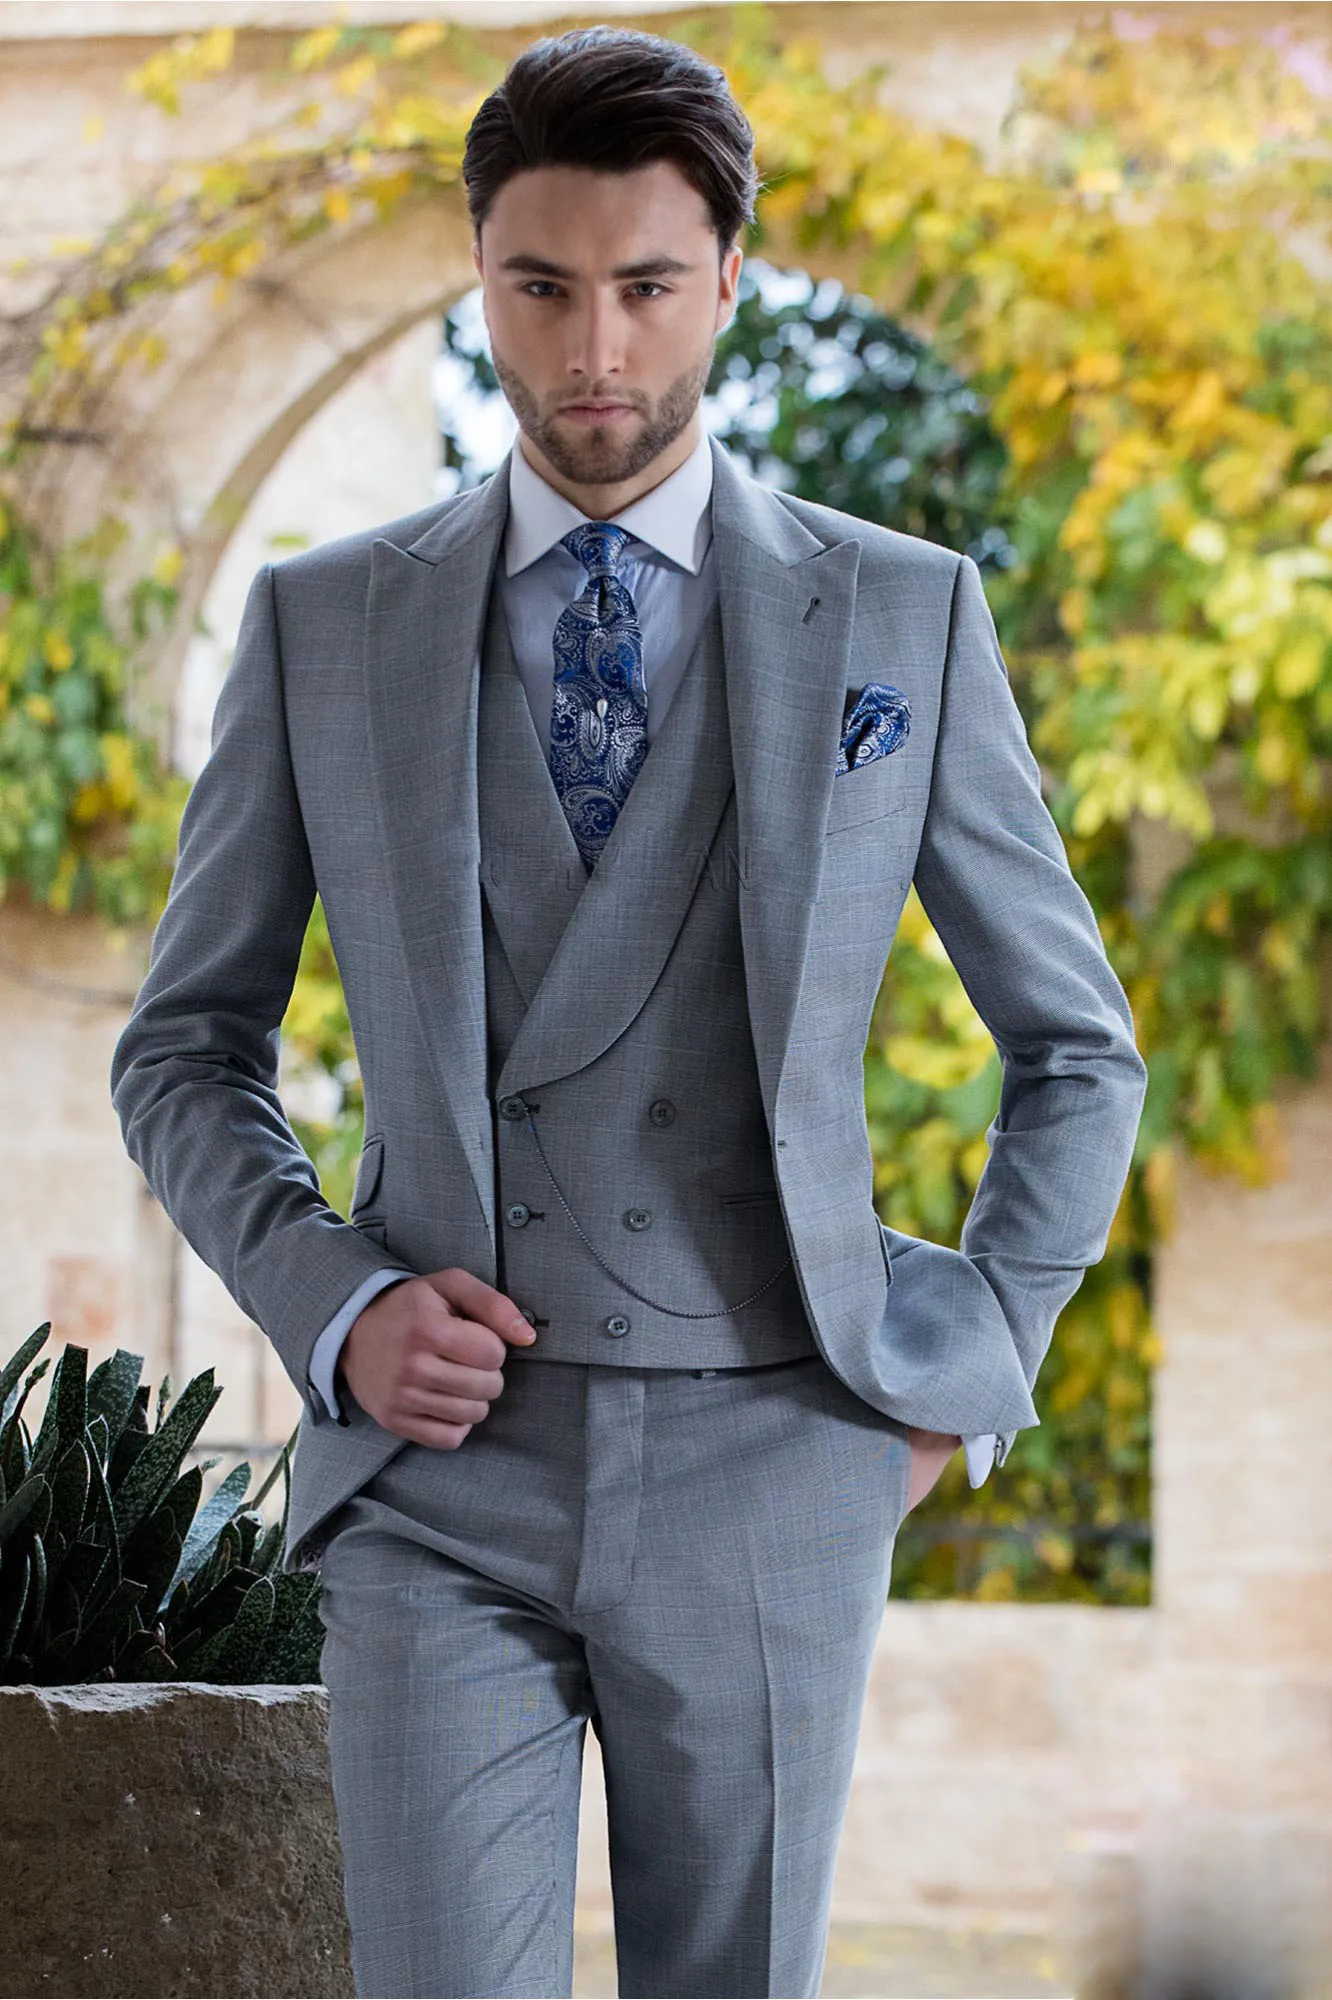 Italian-style grand wedding suit for your big day this year - Bucco Couture  -Custom clothing of distinction- custom suits in NY NJ PA